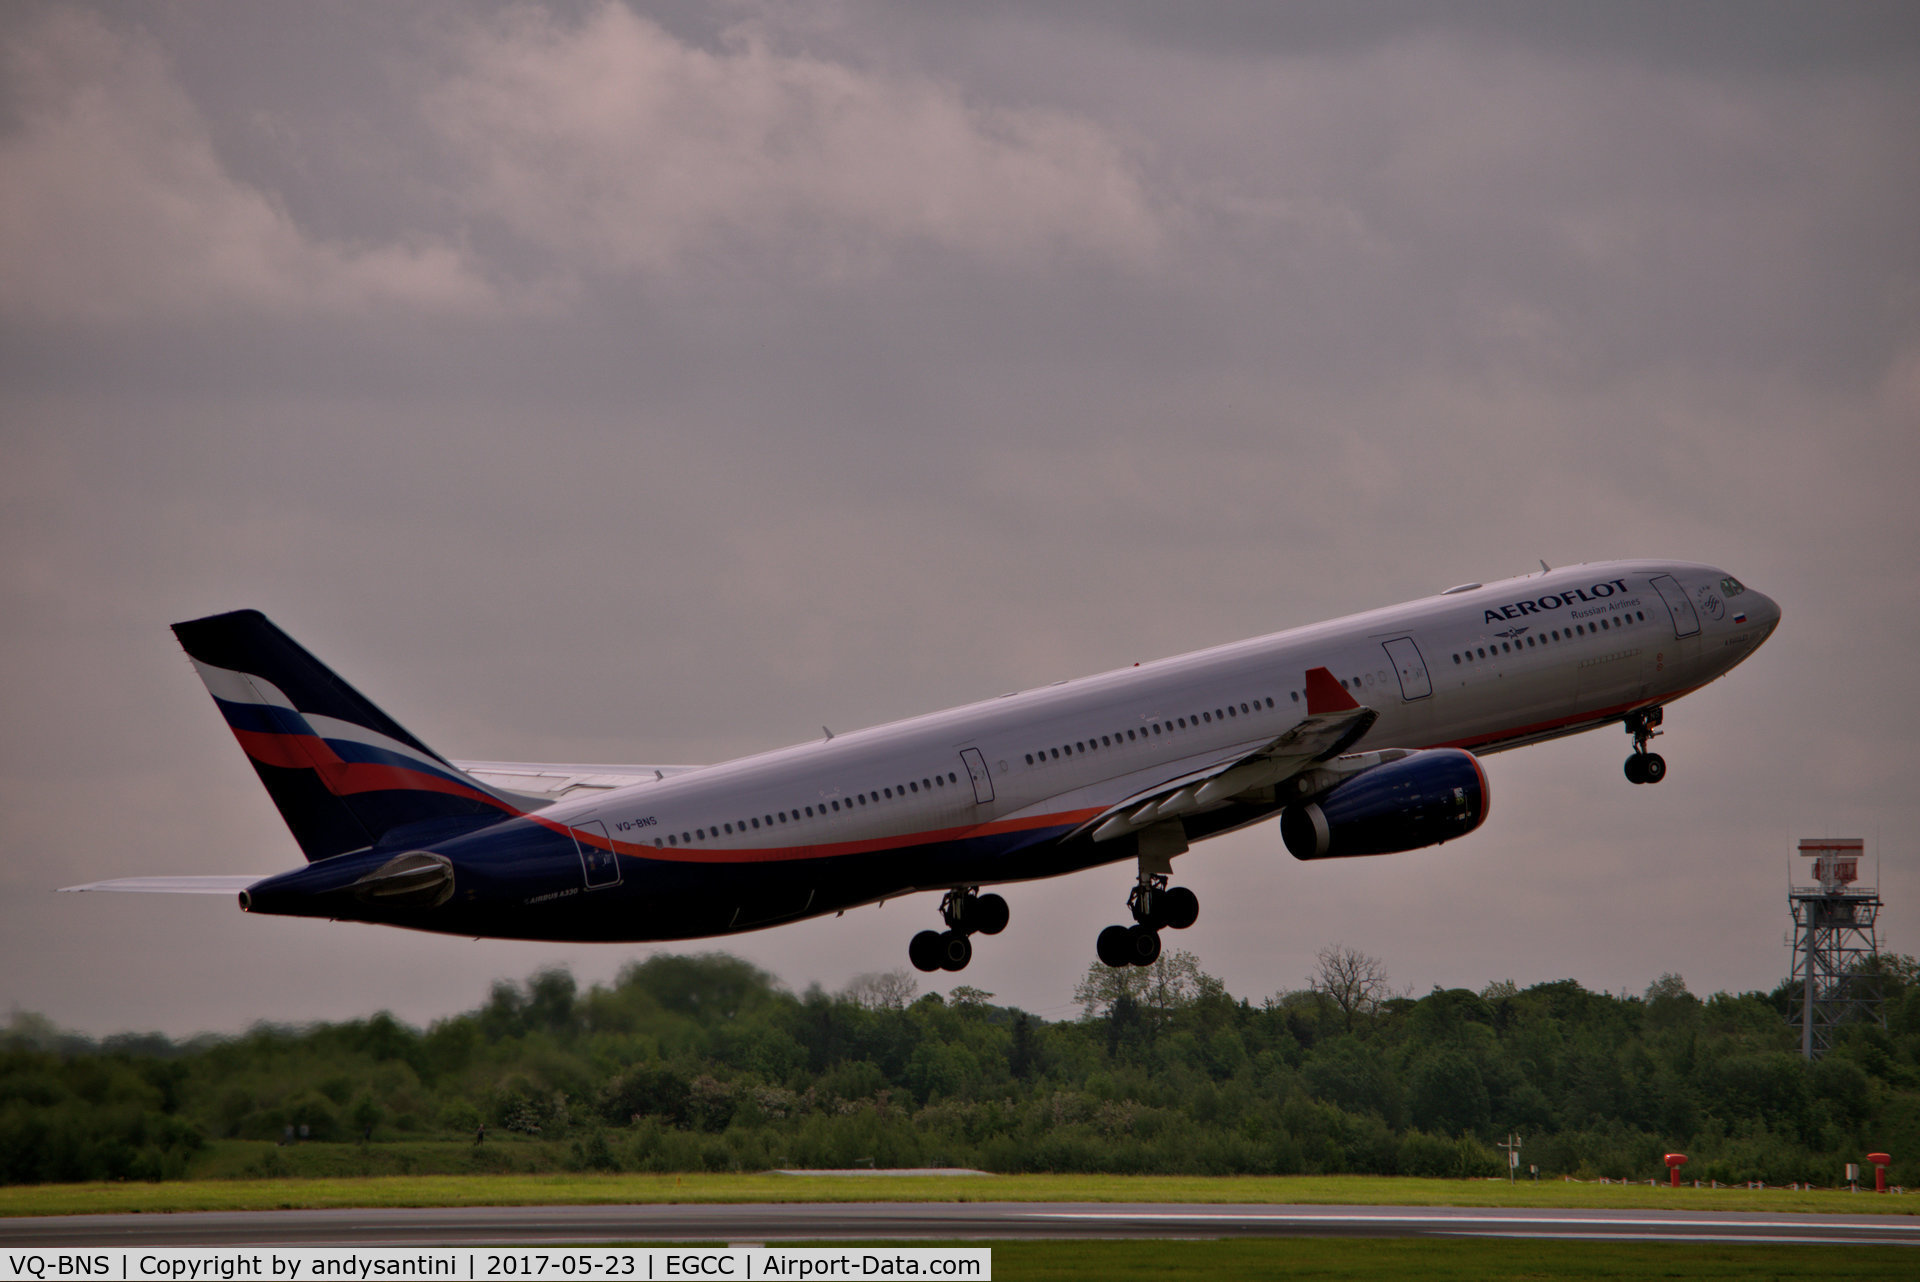 VQ-BNS, 2011 Airbus A330-343X C/N 1264, just took off from [man egcc uk]